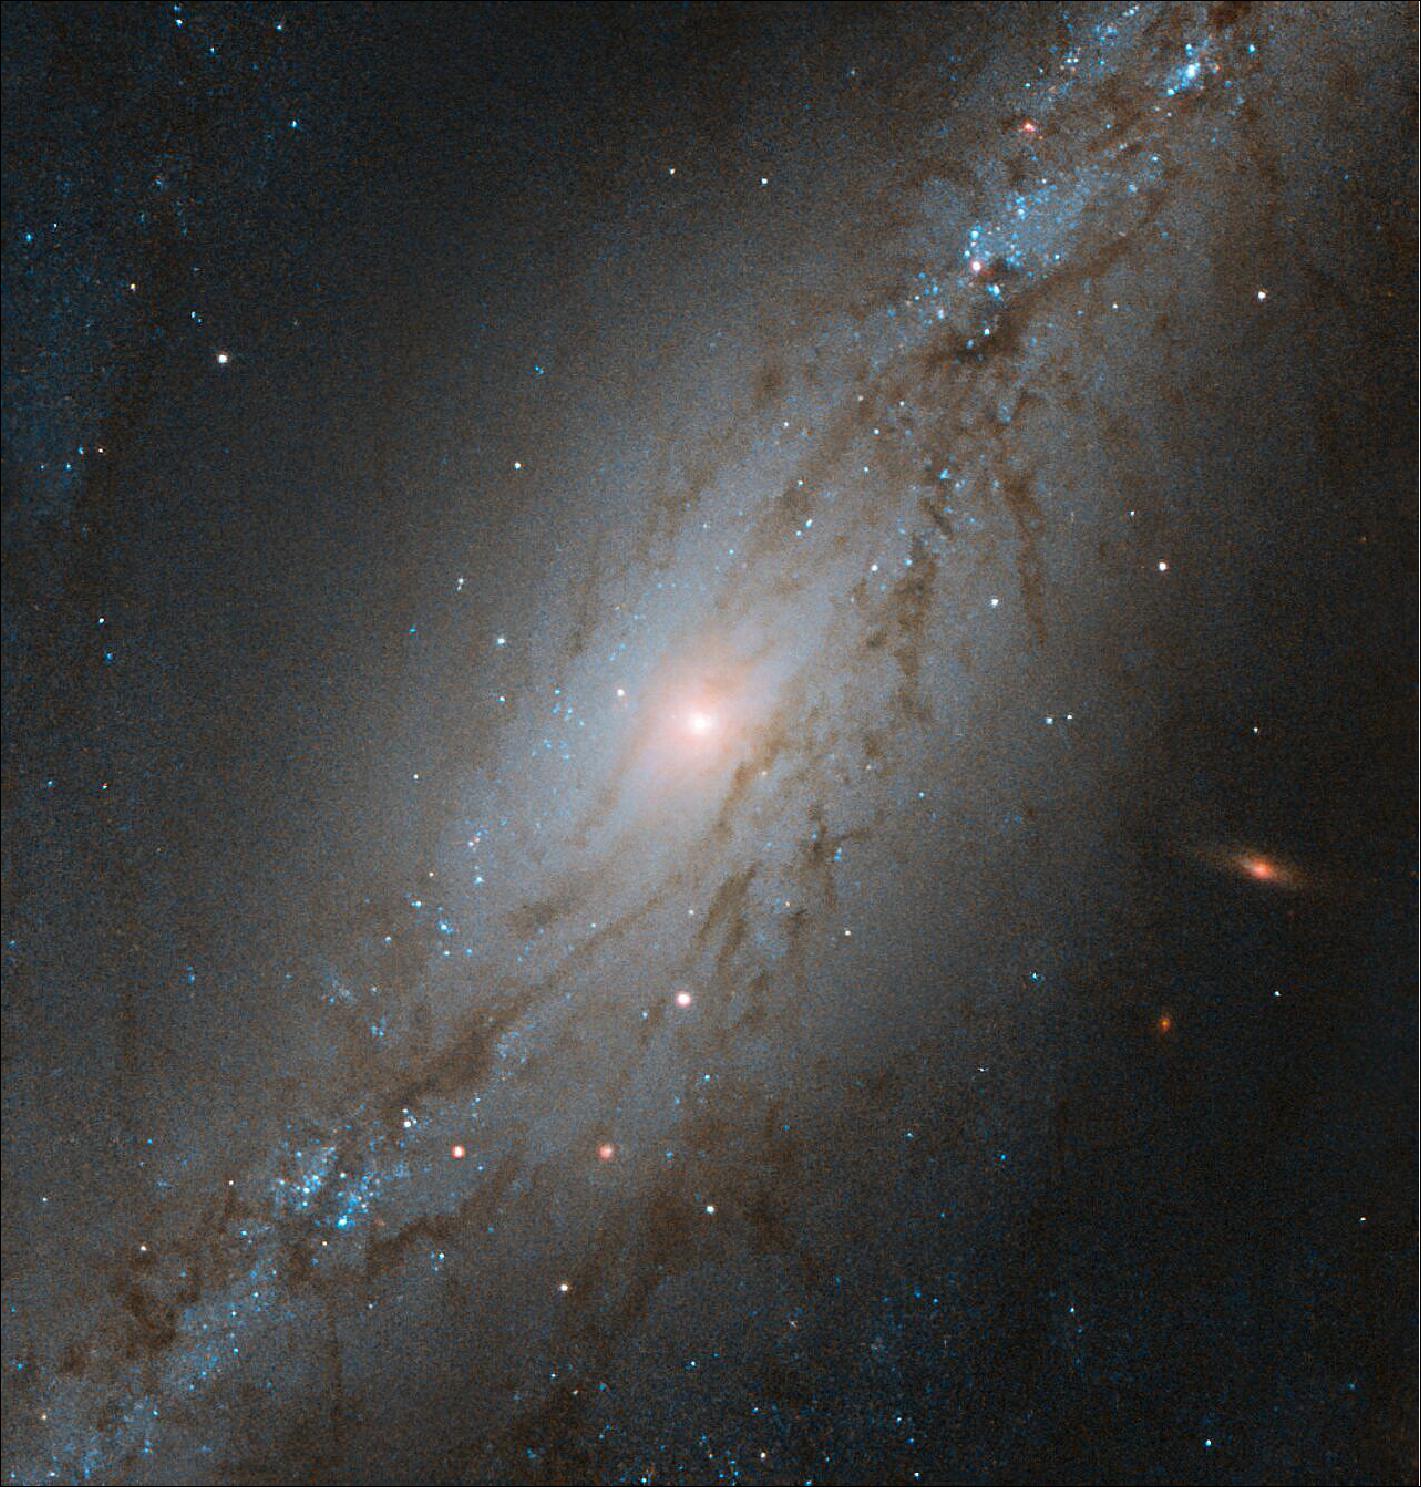 Figure 49: Captured by the NASA/ESA Hubble Space Telescope, this image shows NGC 7513, a barred spiral galaxy. Located approximately 60 million light-years away, NGC 7513 lies within the Sculptor constellation in the southern hemisphere (image credit: ESA/Hubble & NASA, M. Stiavelli; CC BY 4.0)